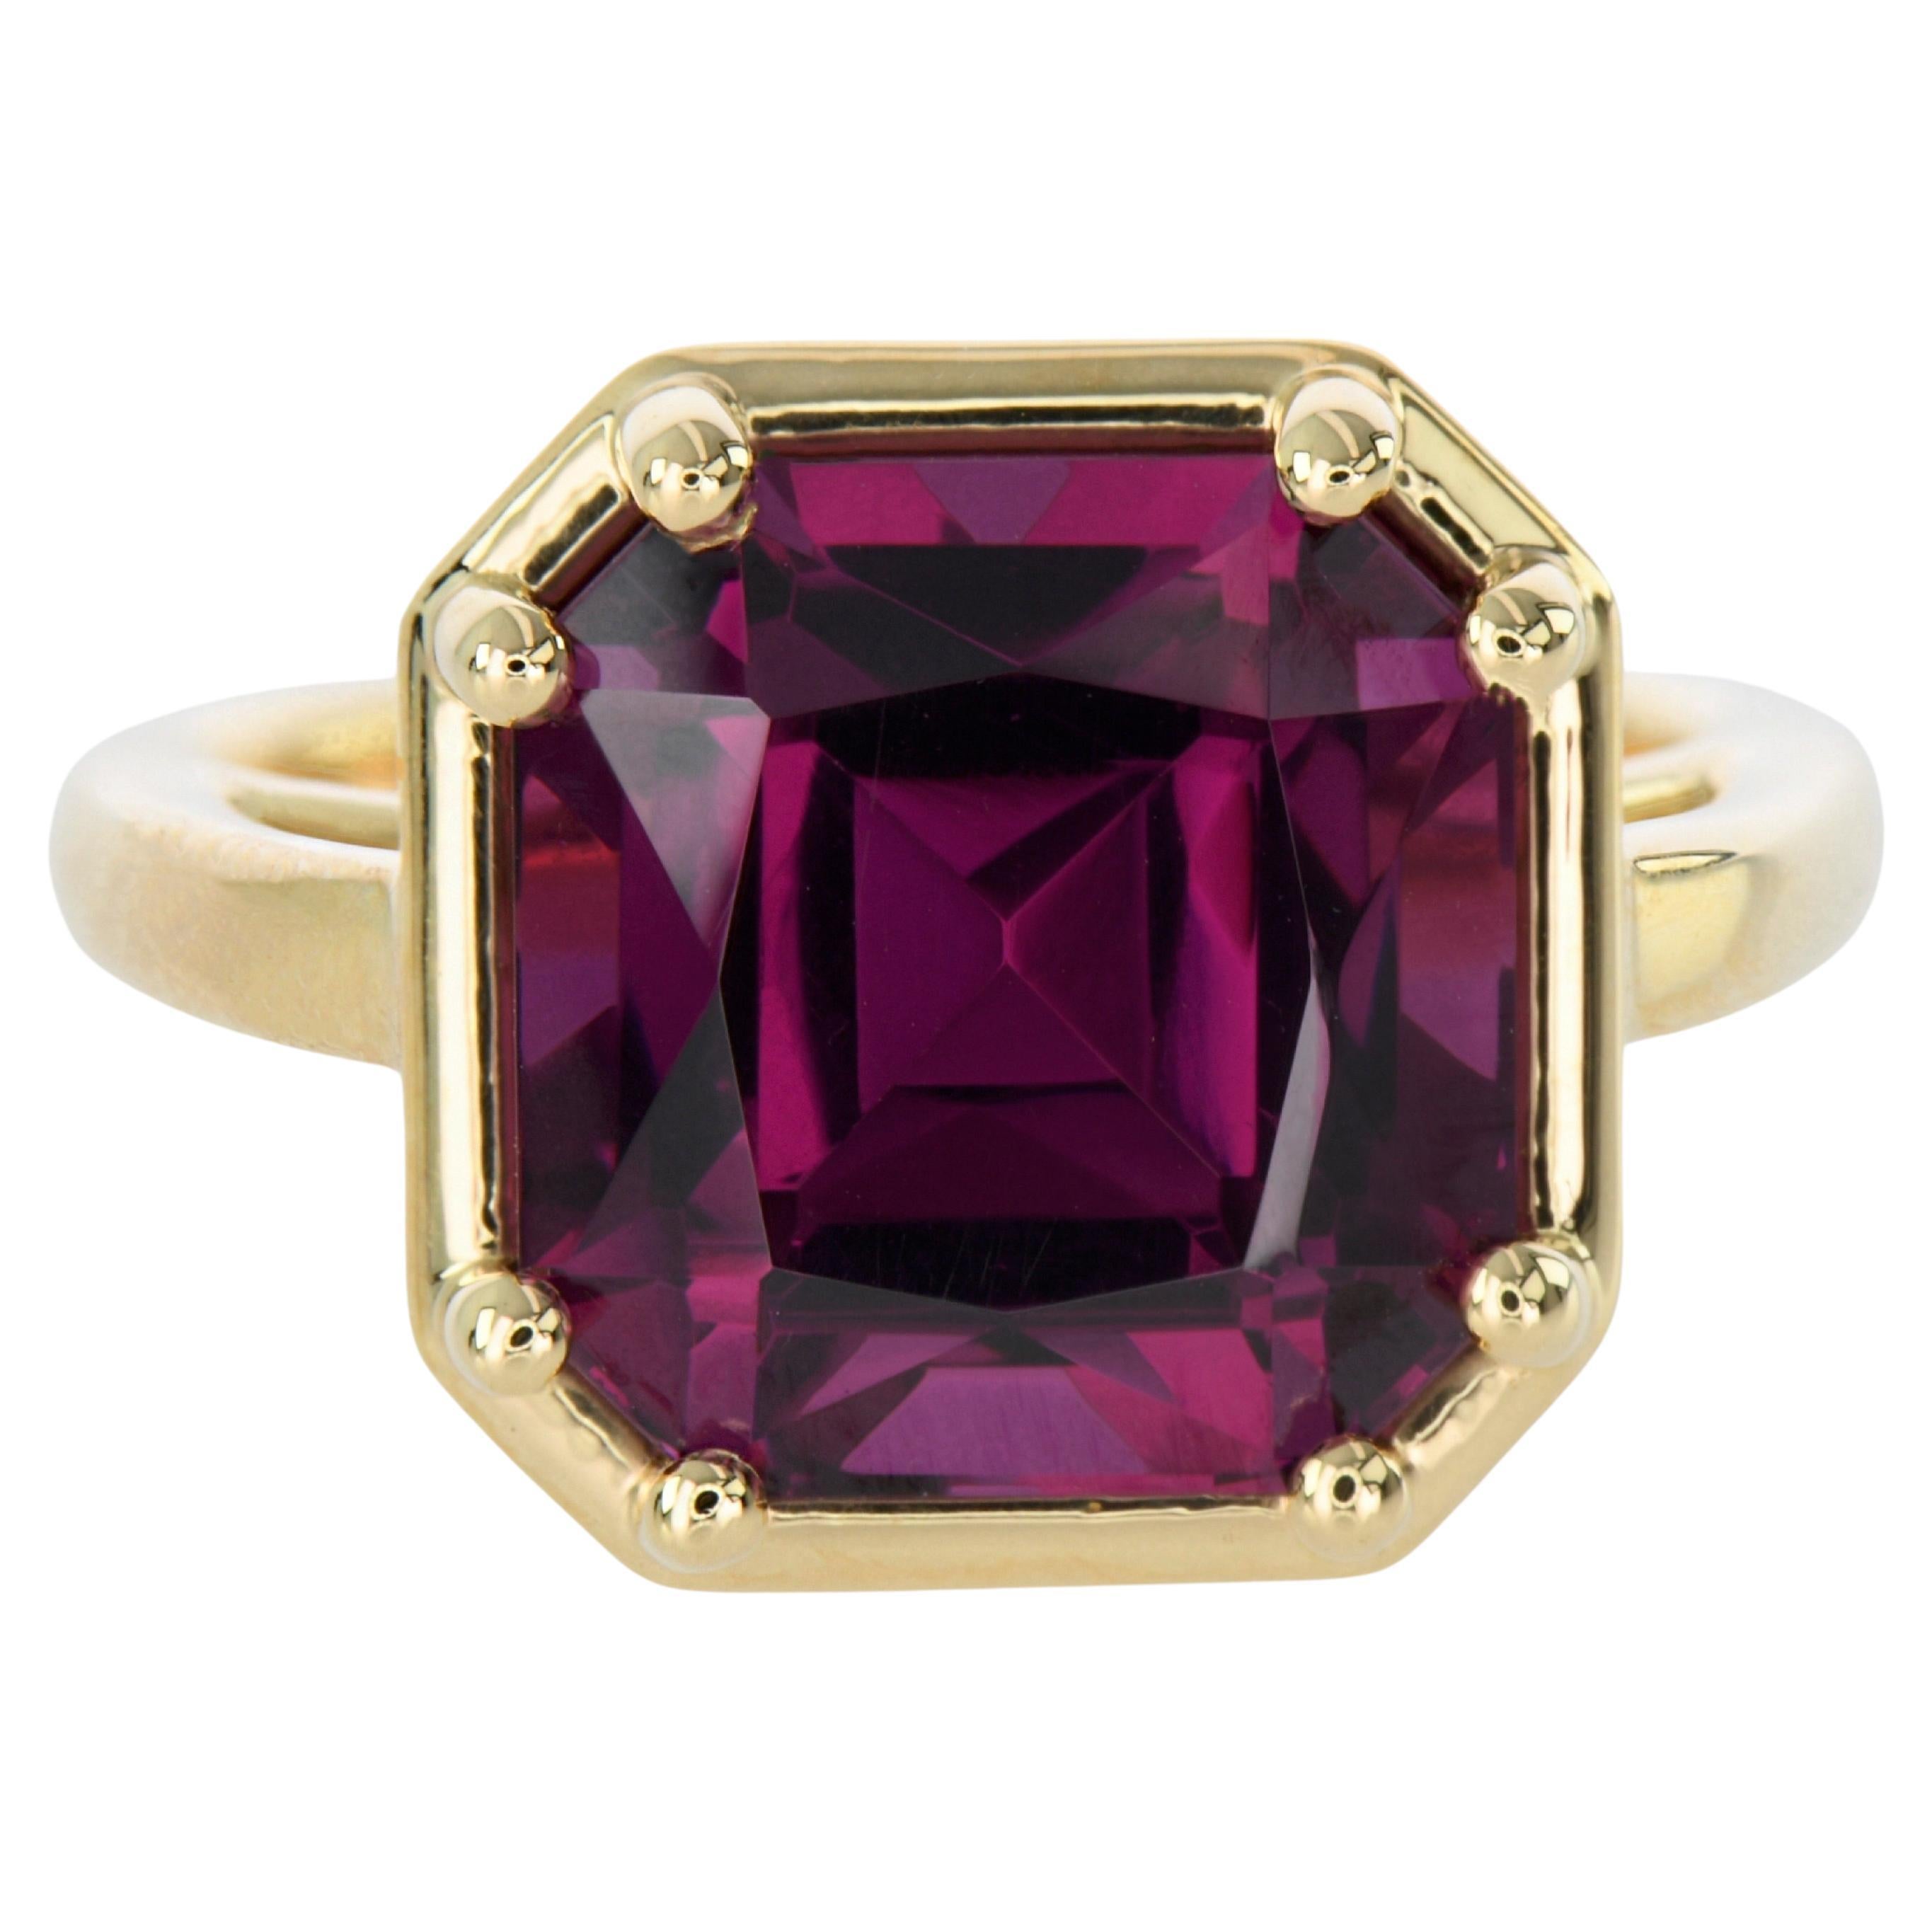 7.54 Rhodolite Ring-Radiant Cut-18KT Yellow Gold-GIA Certified-Rare For Sale